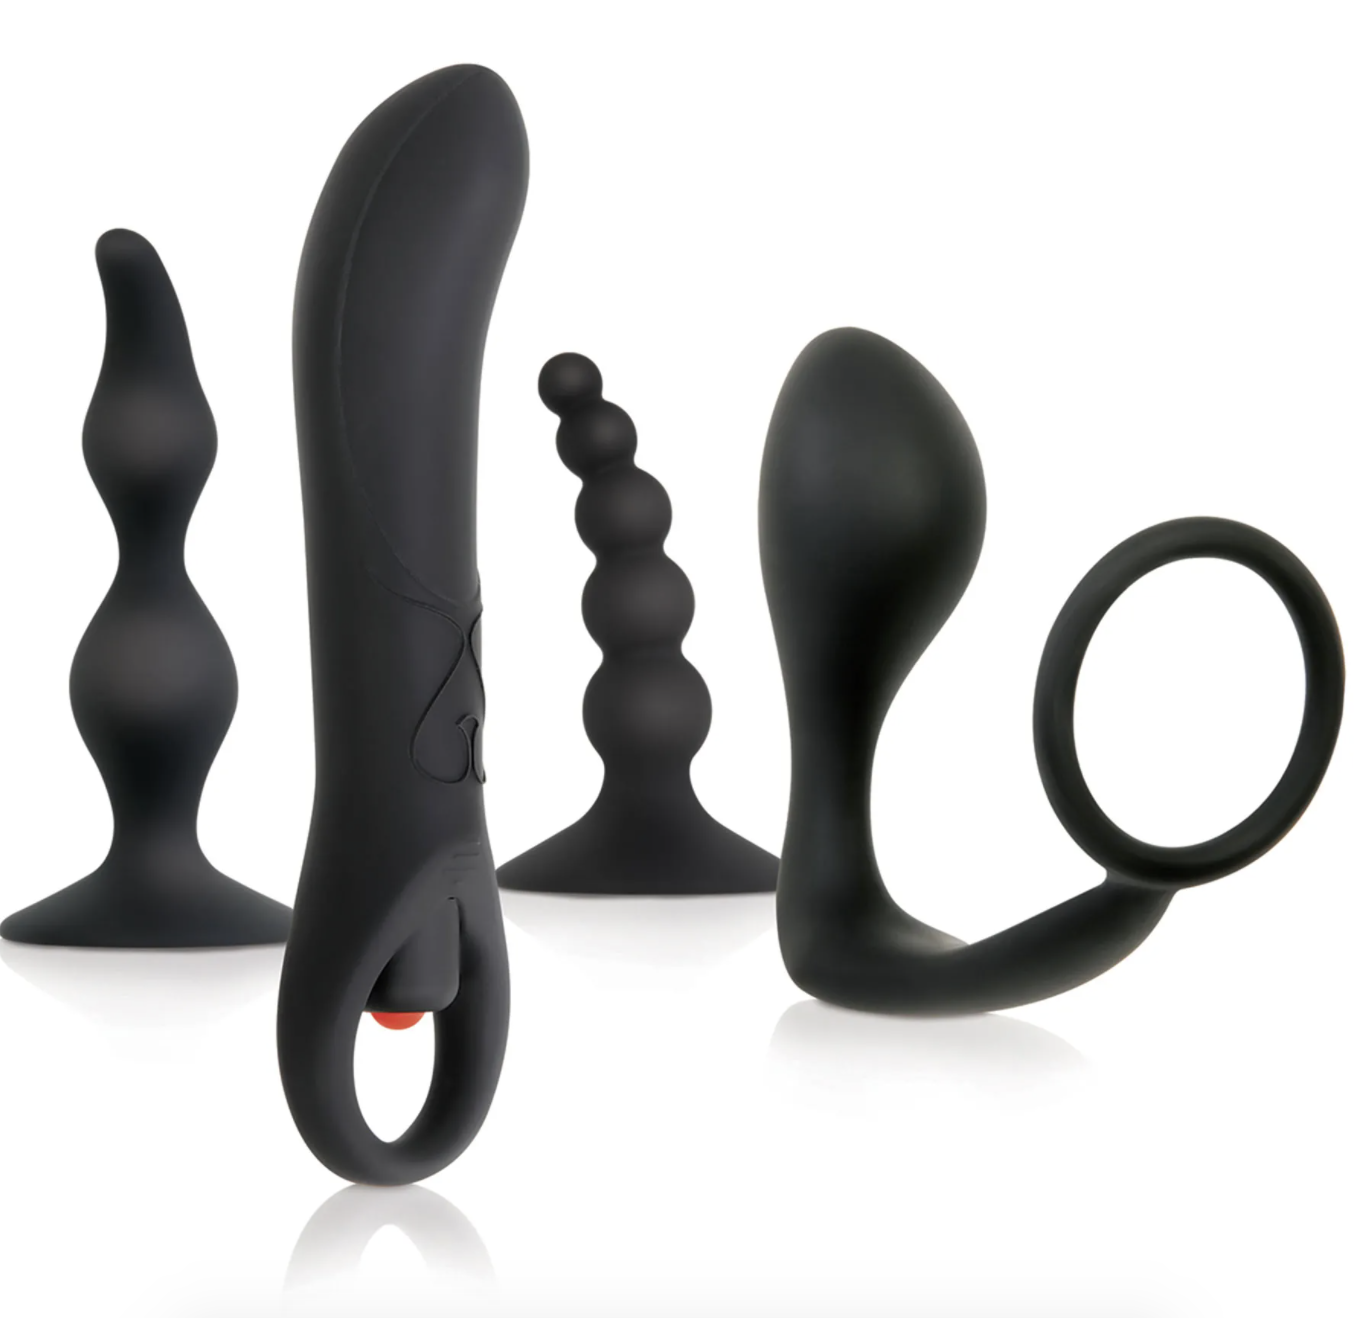 28 Sex Toys For Anyone Looking To Try Something New